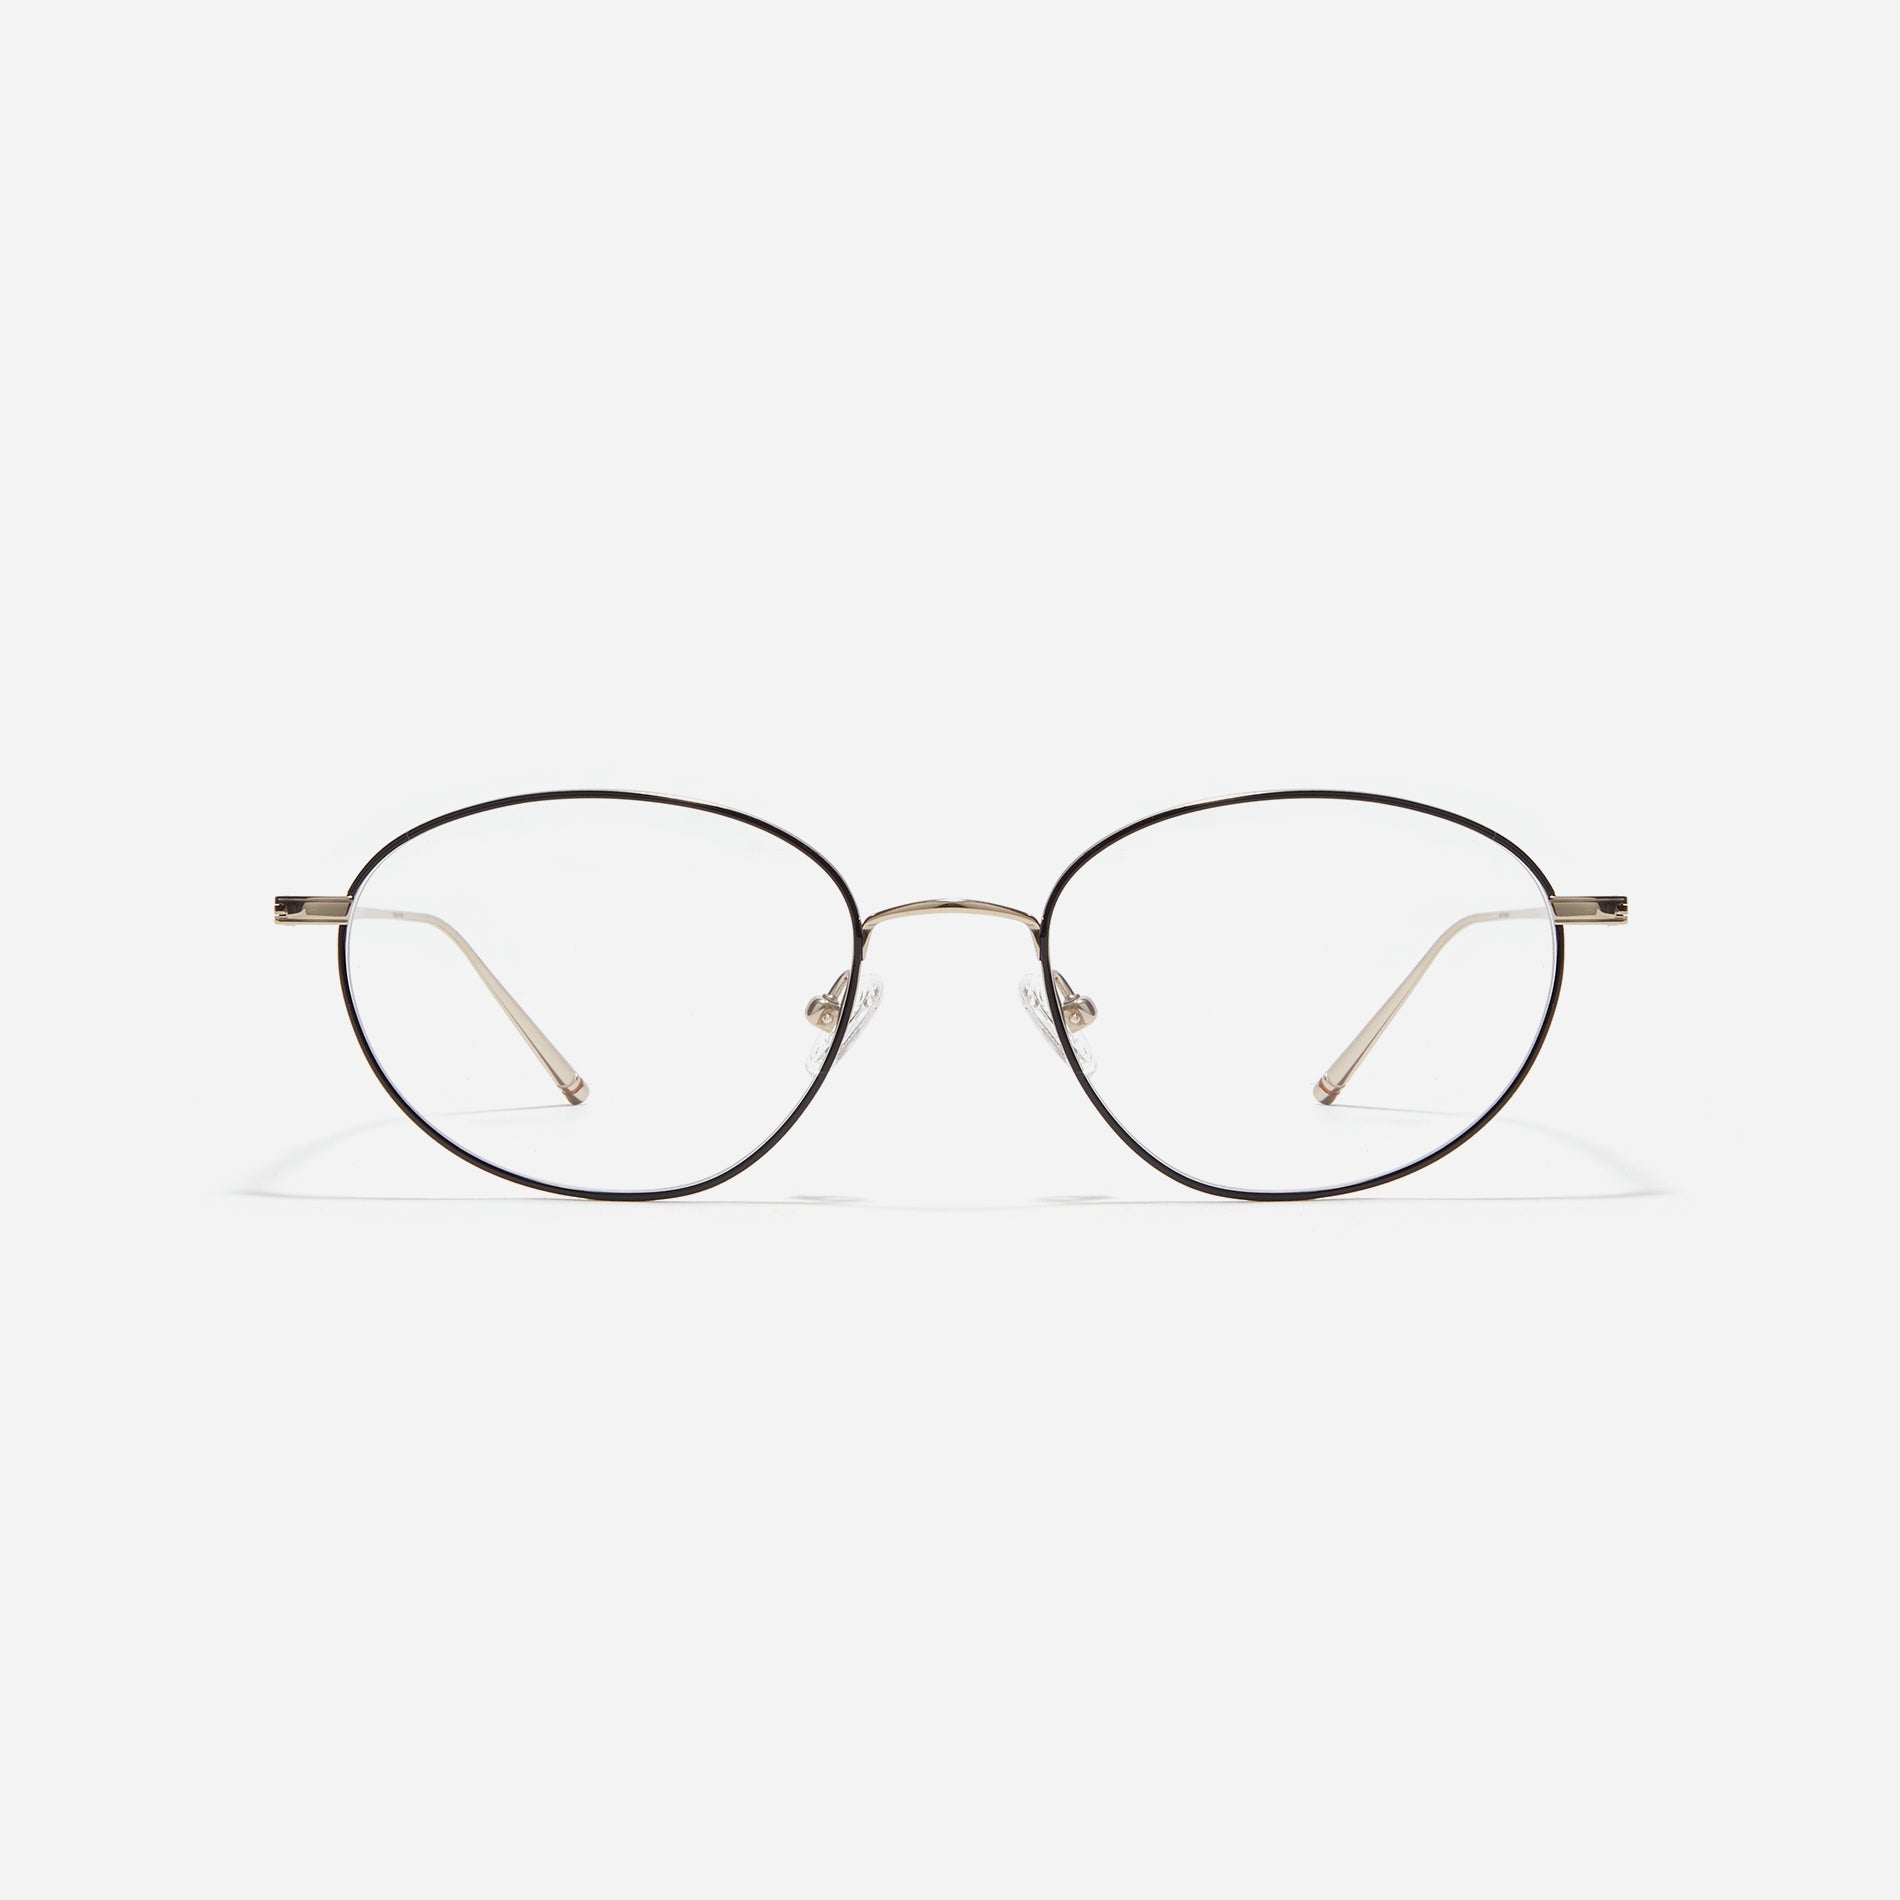  Stylish oval-shaped eyeglasses with slender rims. Crafted entirely from titanium, they guarantee a lighter and more comfortable fit. With a variety of colors available, Edell offers a fashionable style for both men and women.